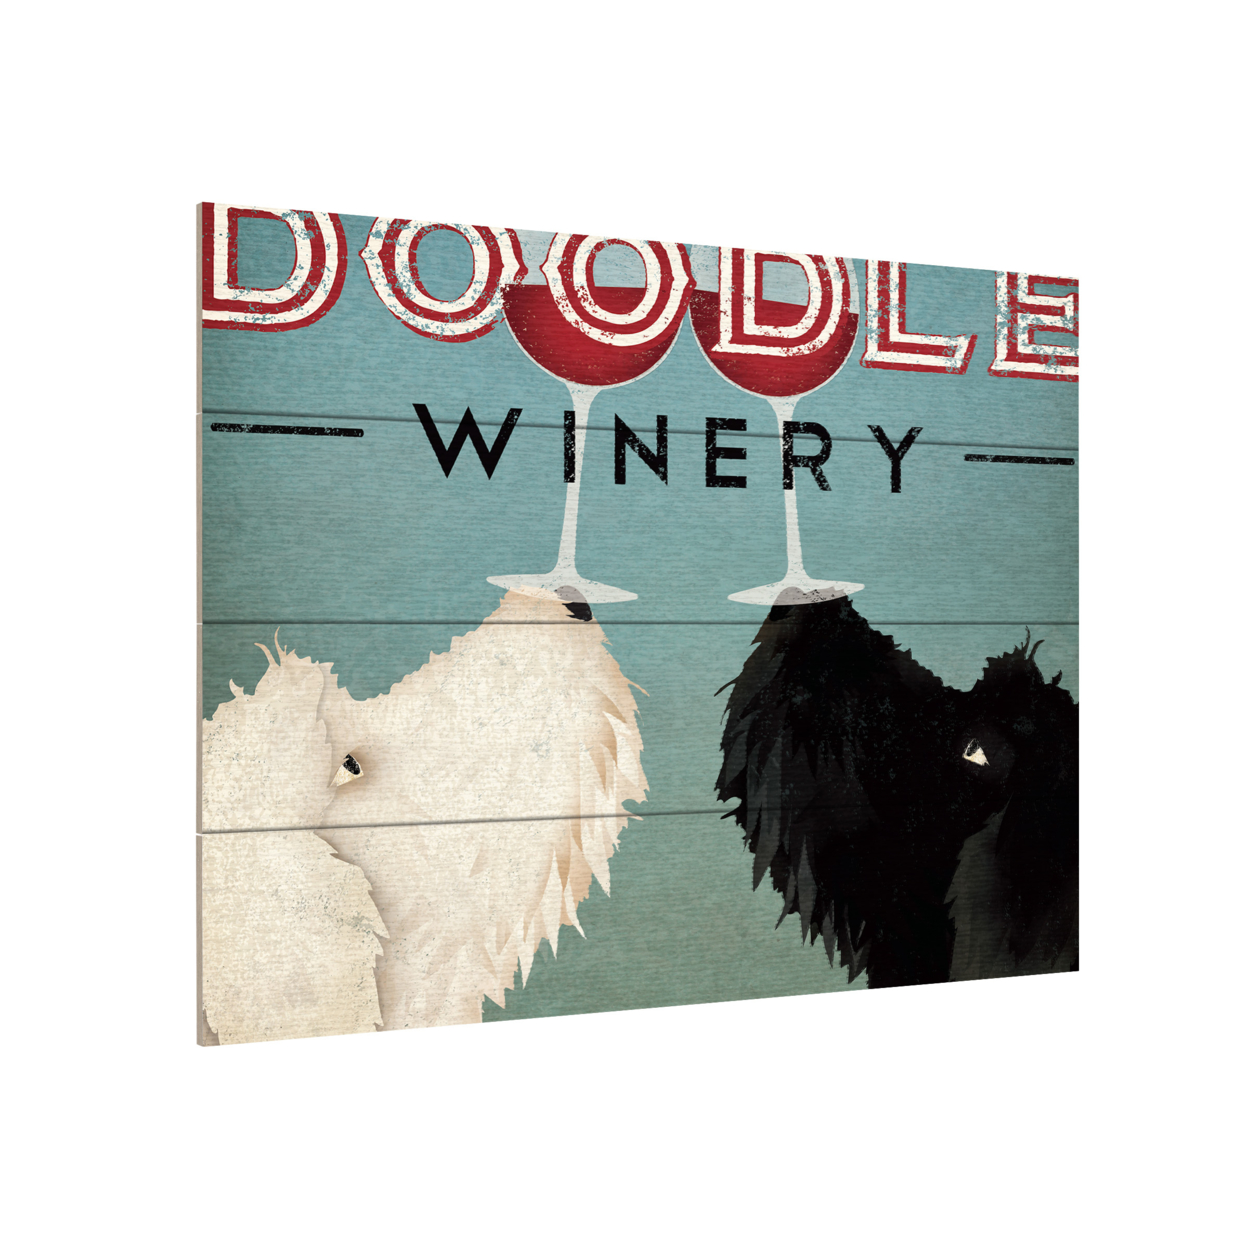 Wall Art 12 X 16 Inches Titled Doodle Wine Ready To Hang Printed On Wooden Planks